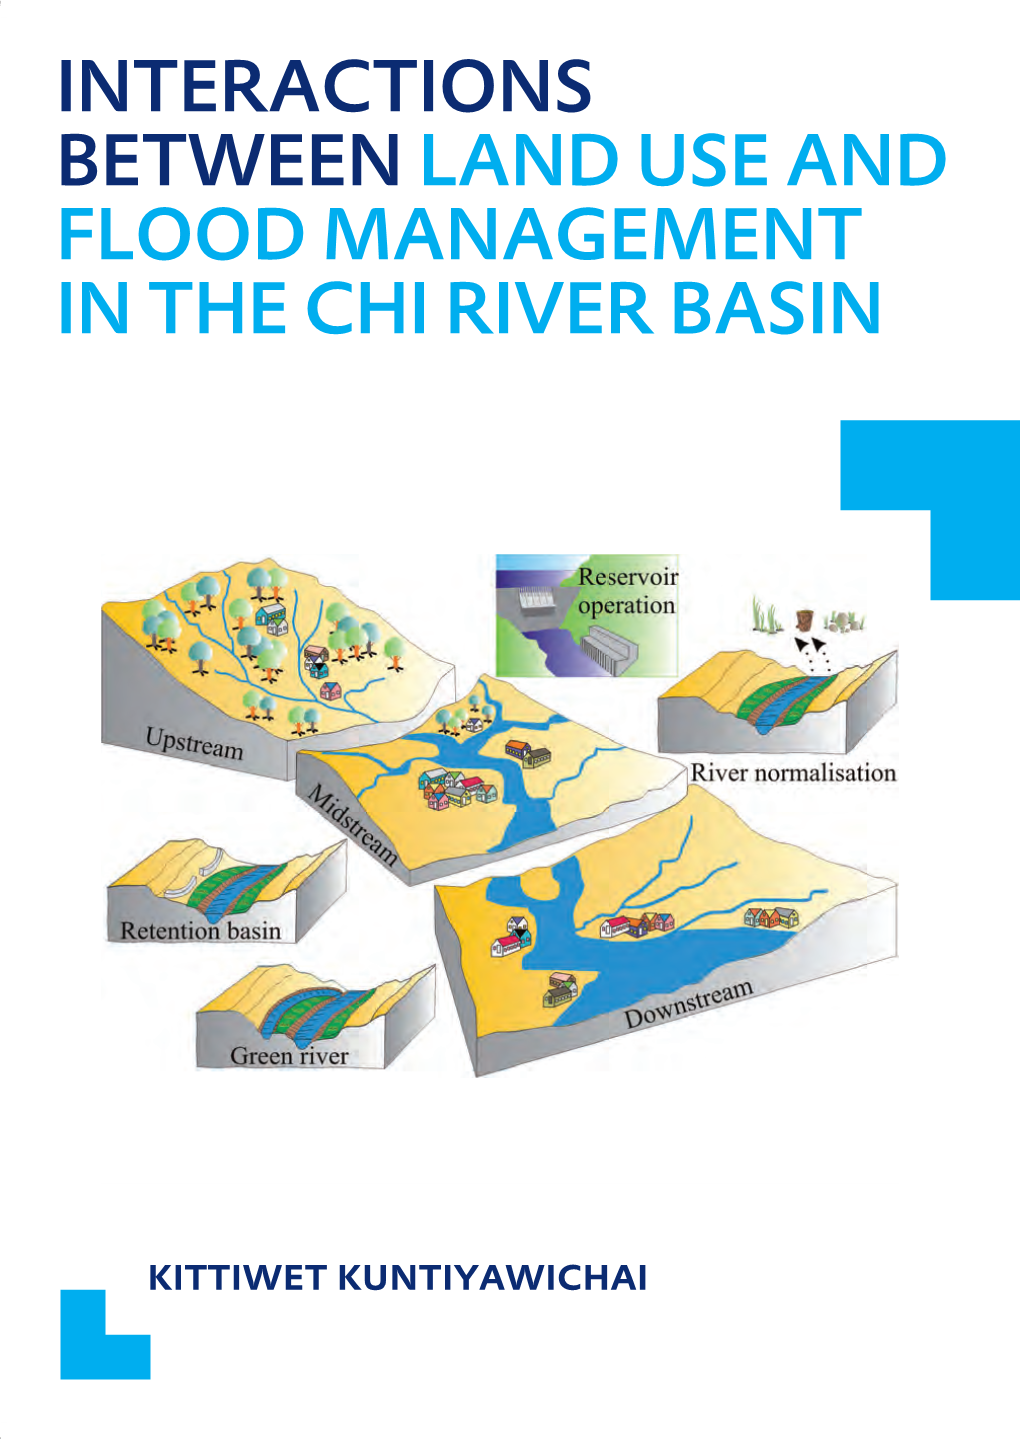 Interactions Between Land Use and Flood Management in the Chi River Basin Between Land Use and Flood Management in the Chi River Basin